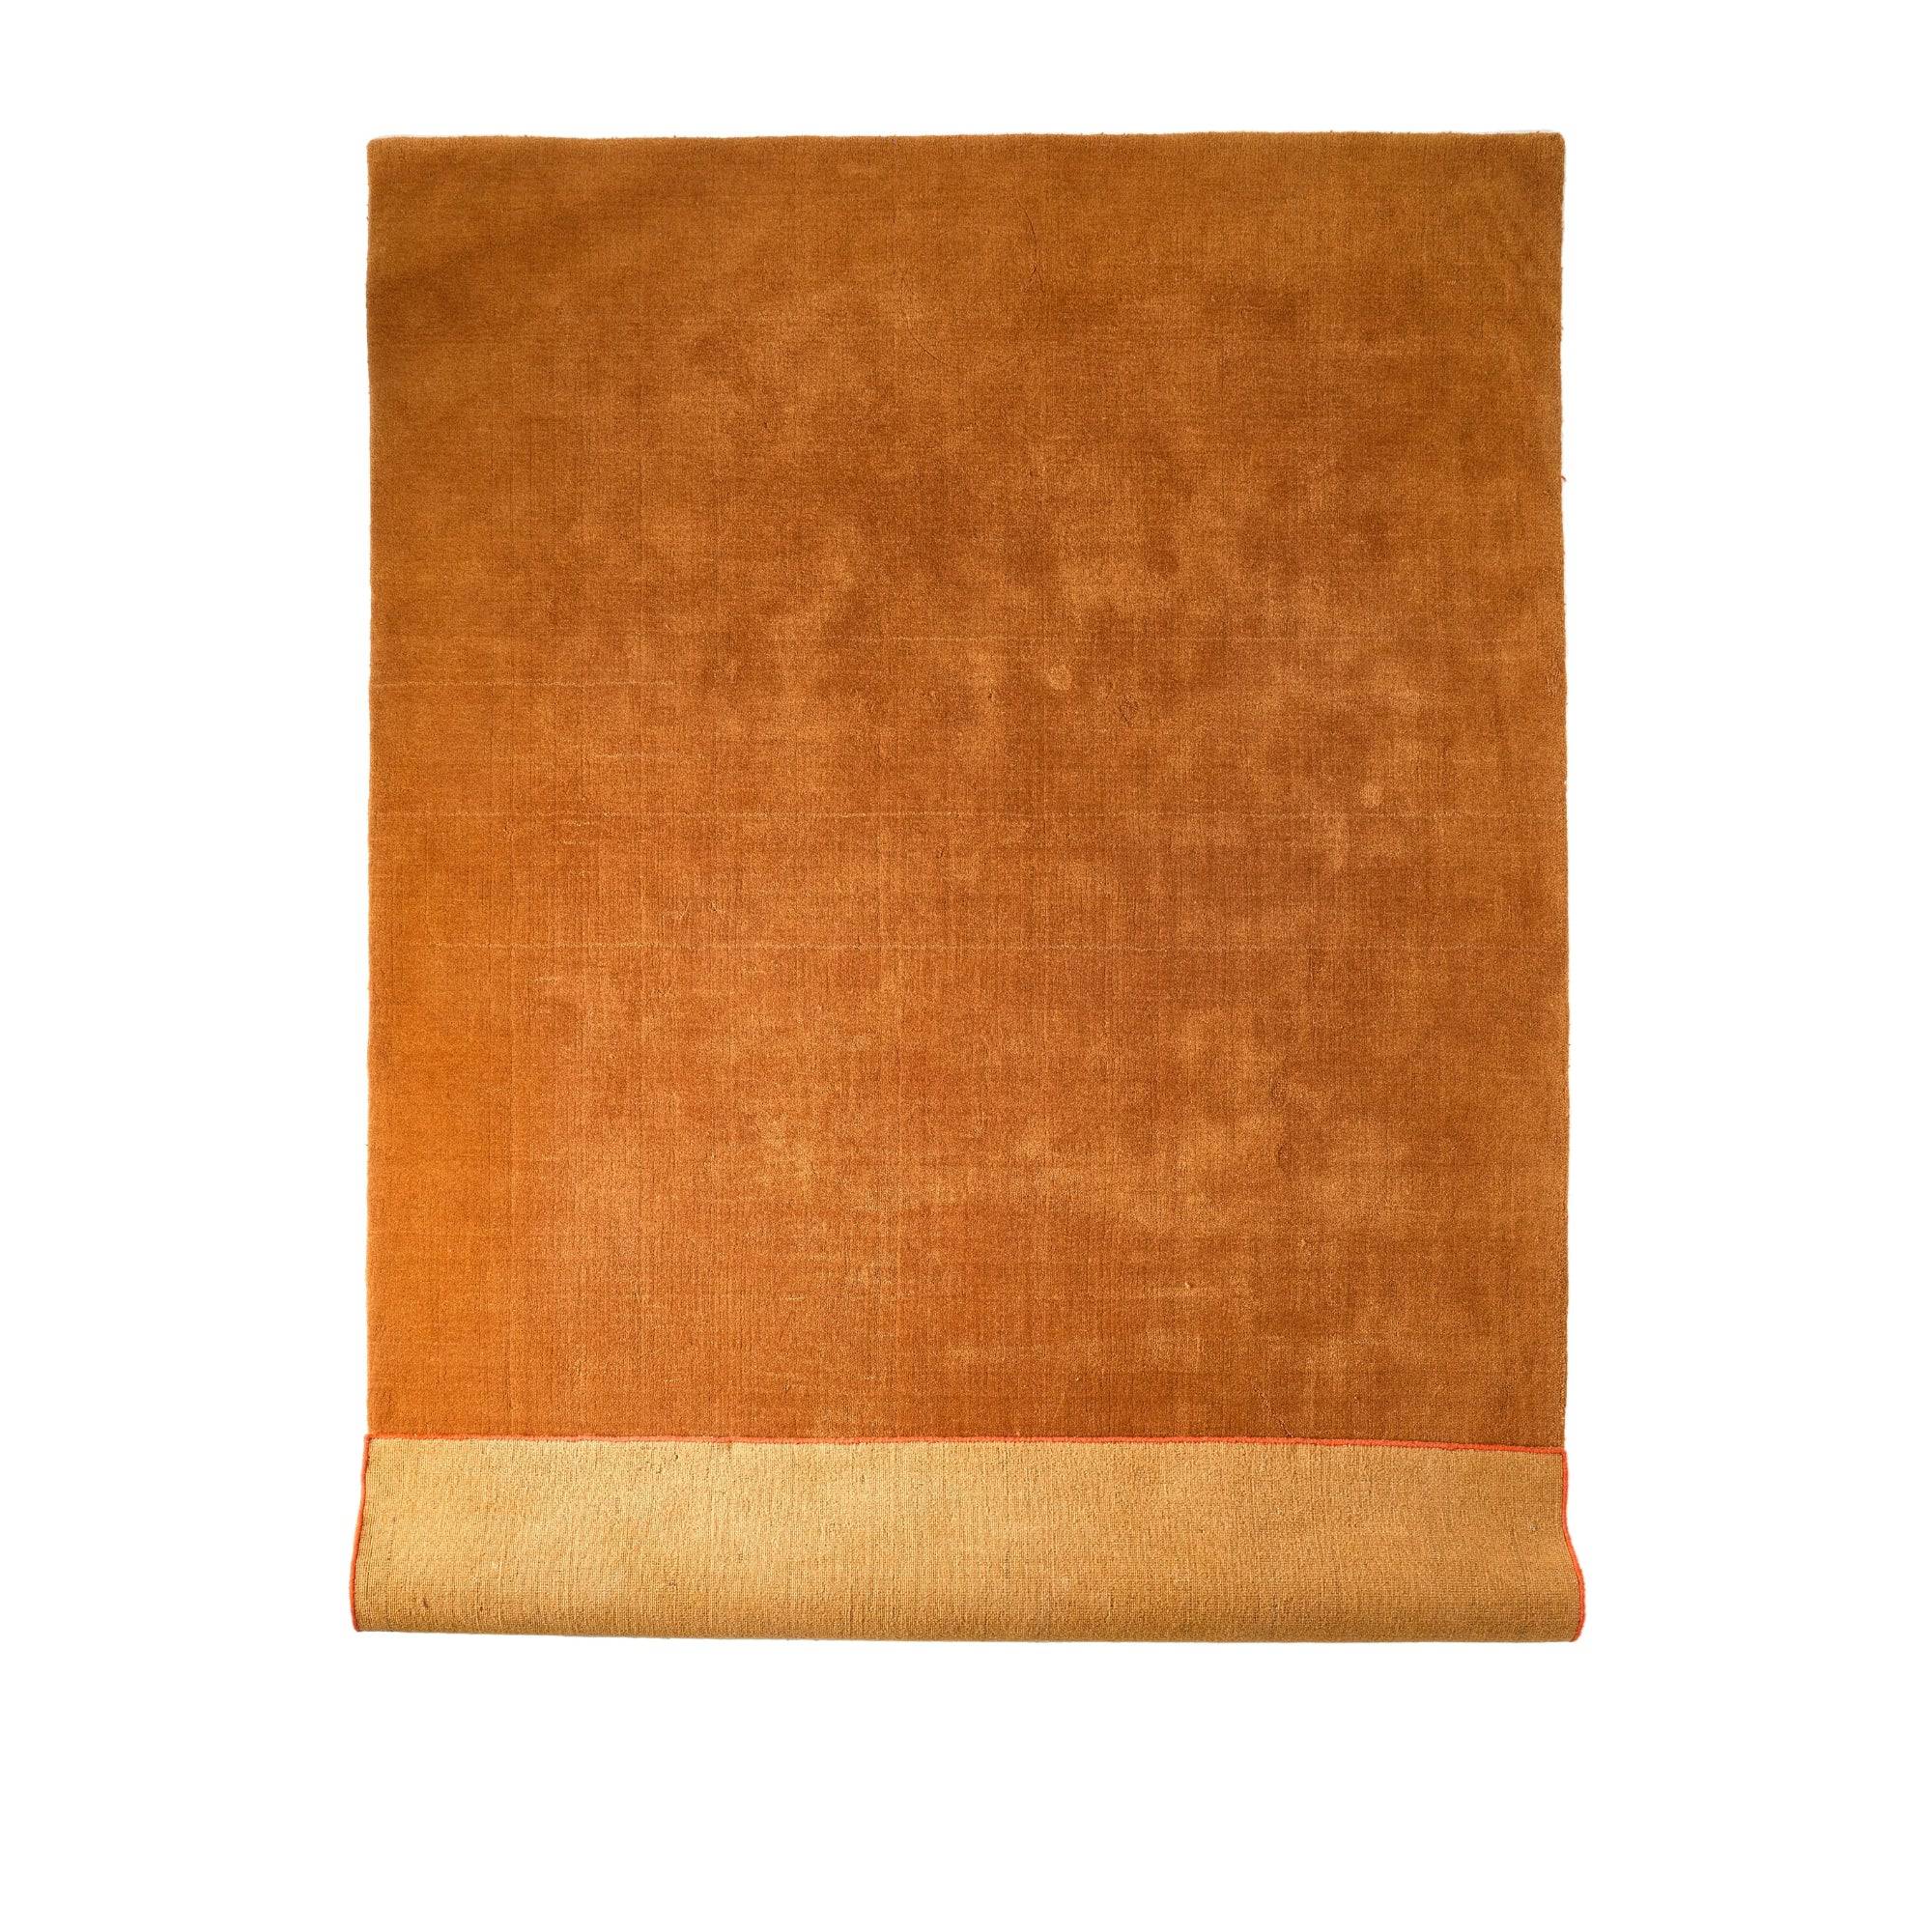 Outline Rug - Cognac - THAT COOL LIVING